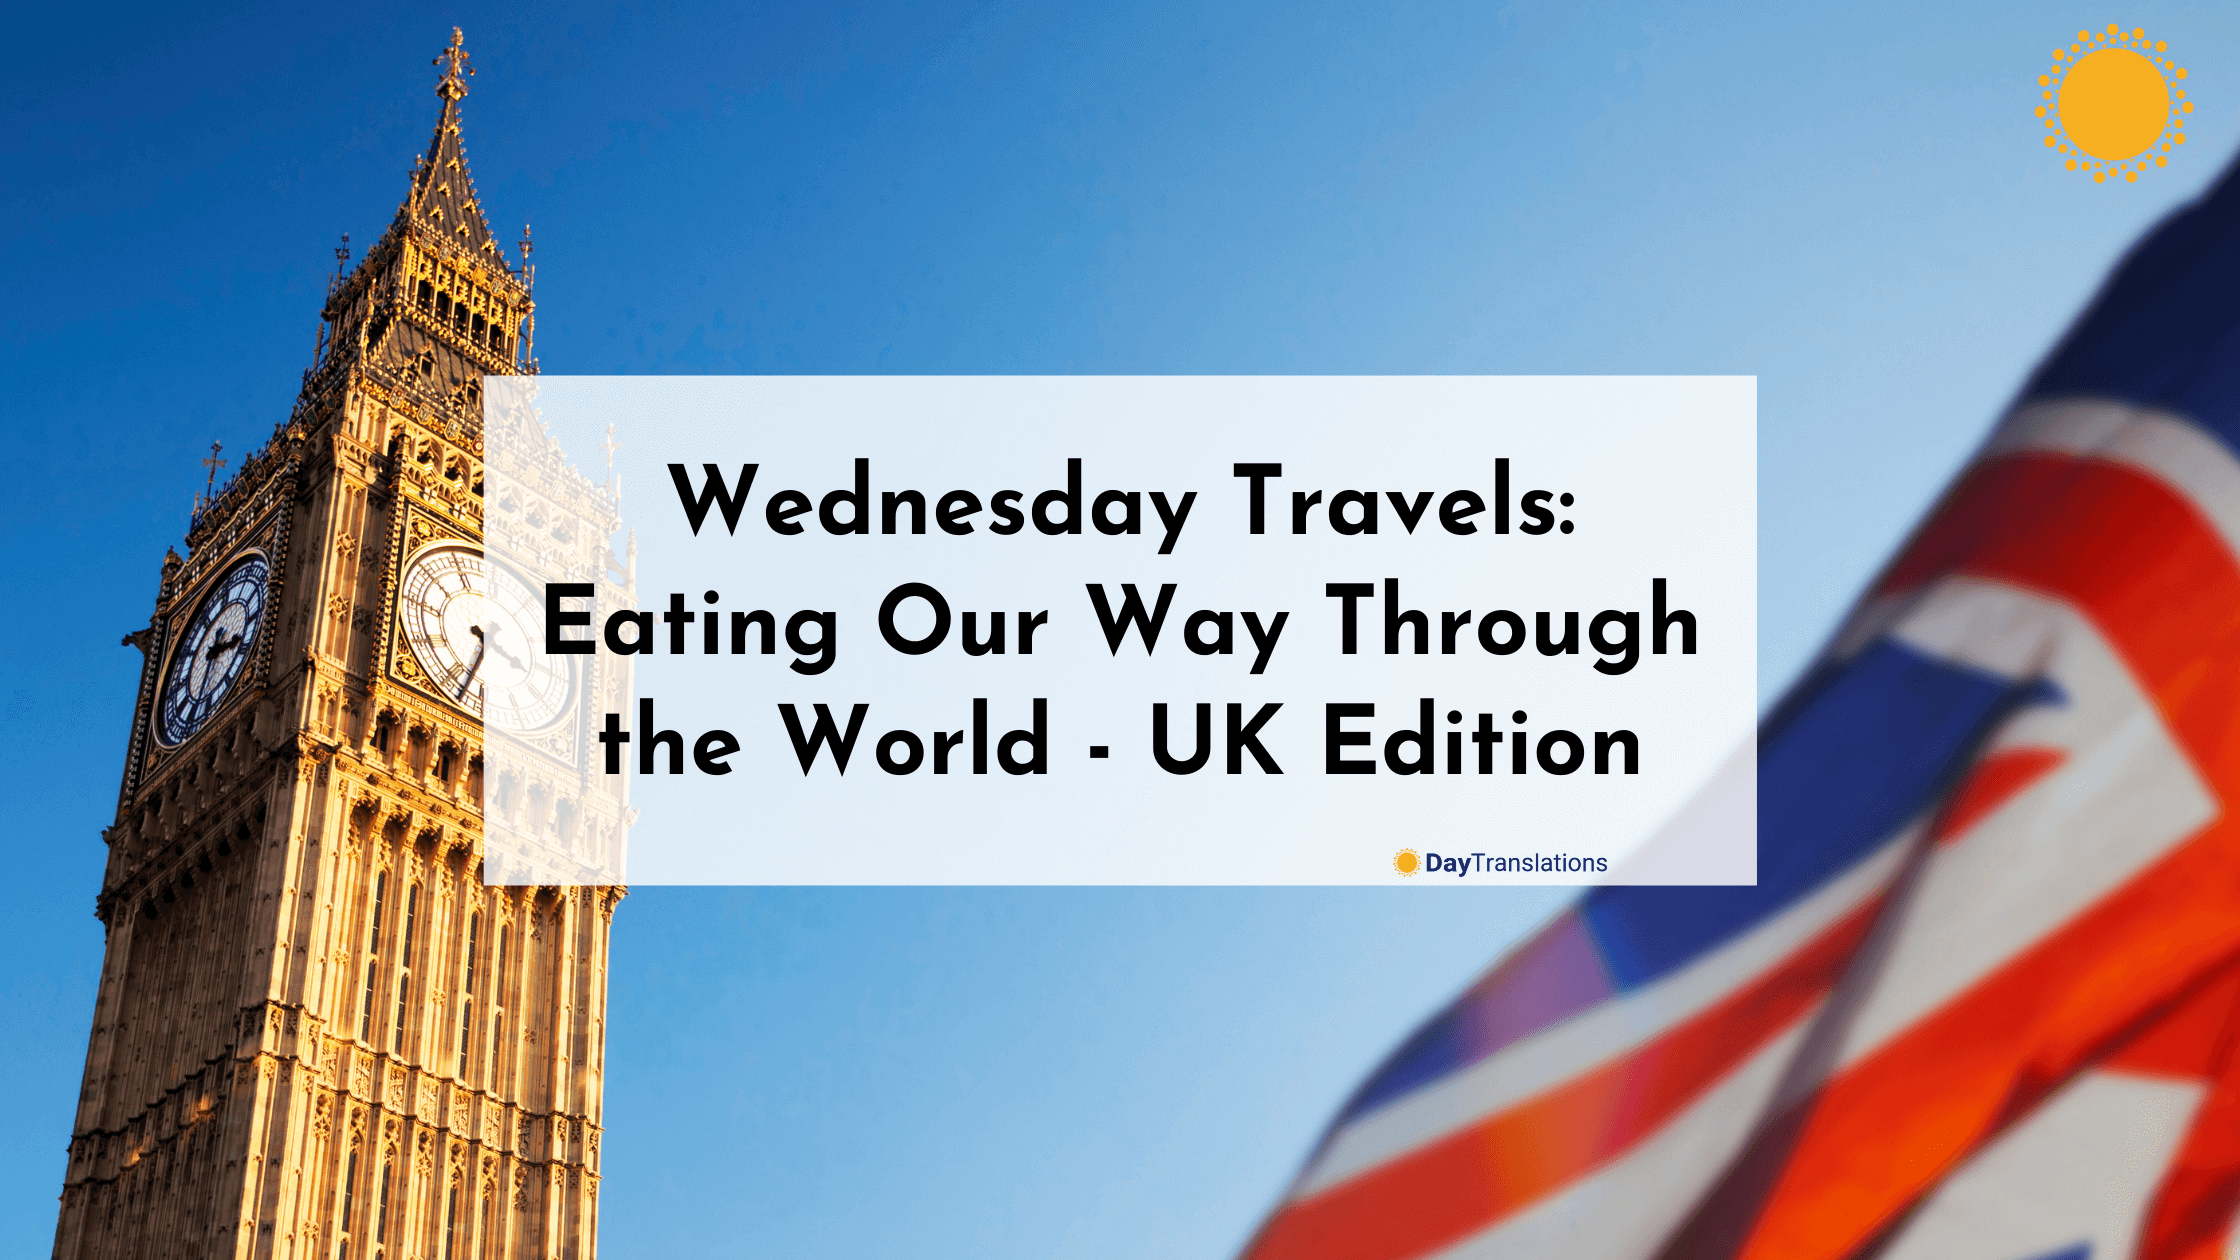 Wednesday Travel: Eating Our Way Through the World UK Edition